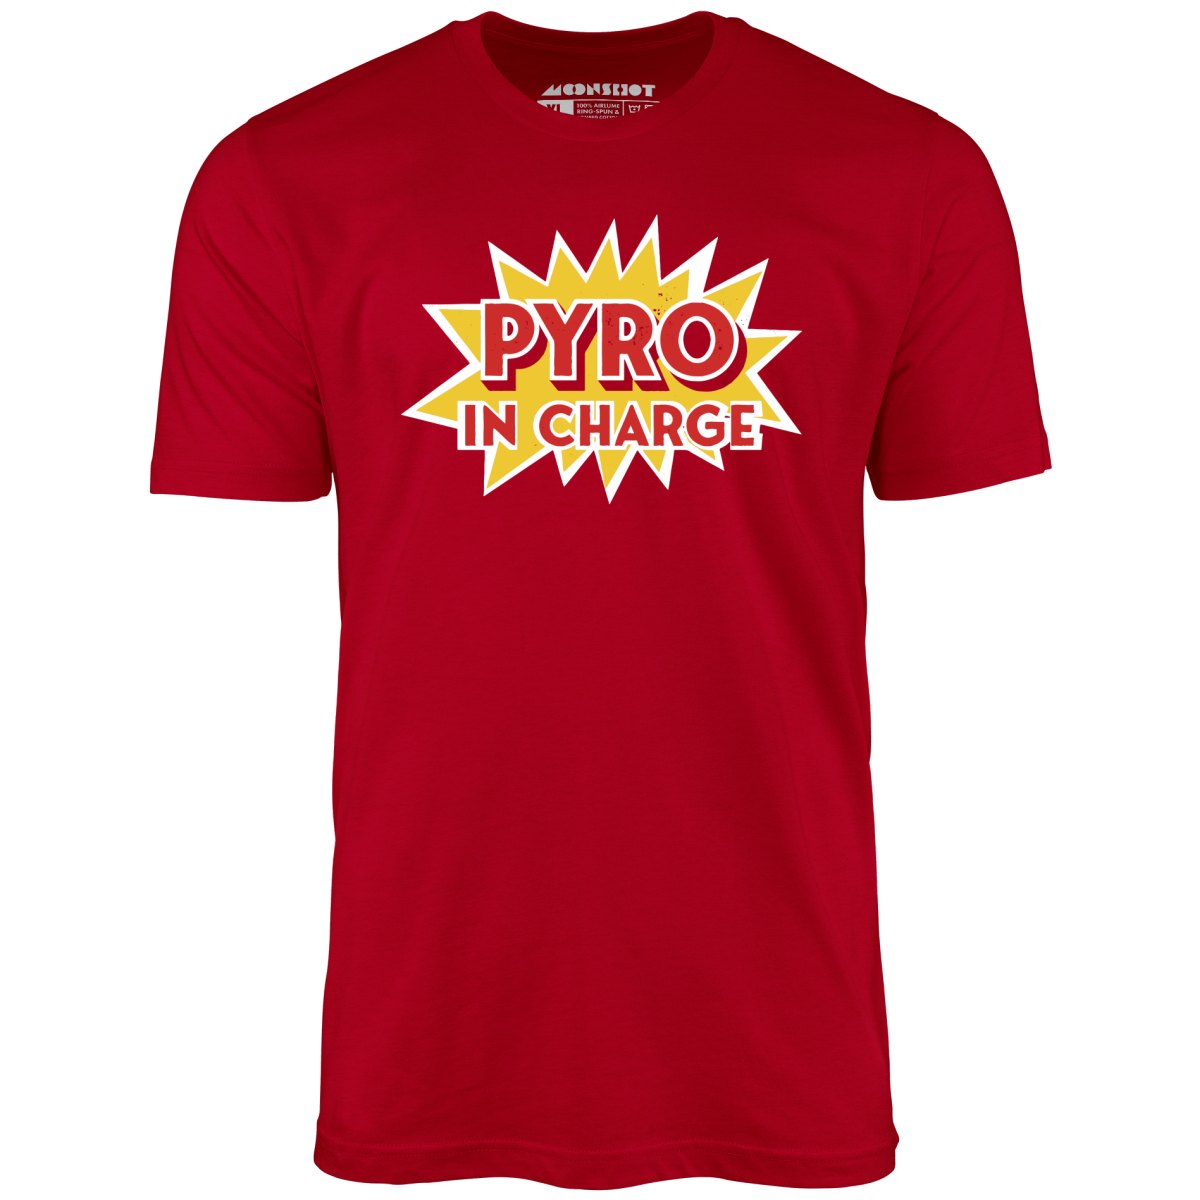 Pyro in Charge - Unisex T-Shirt